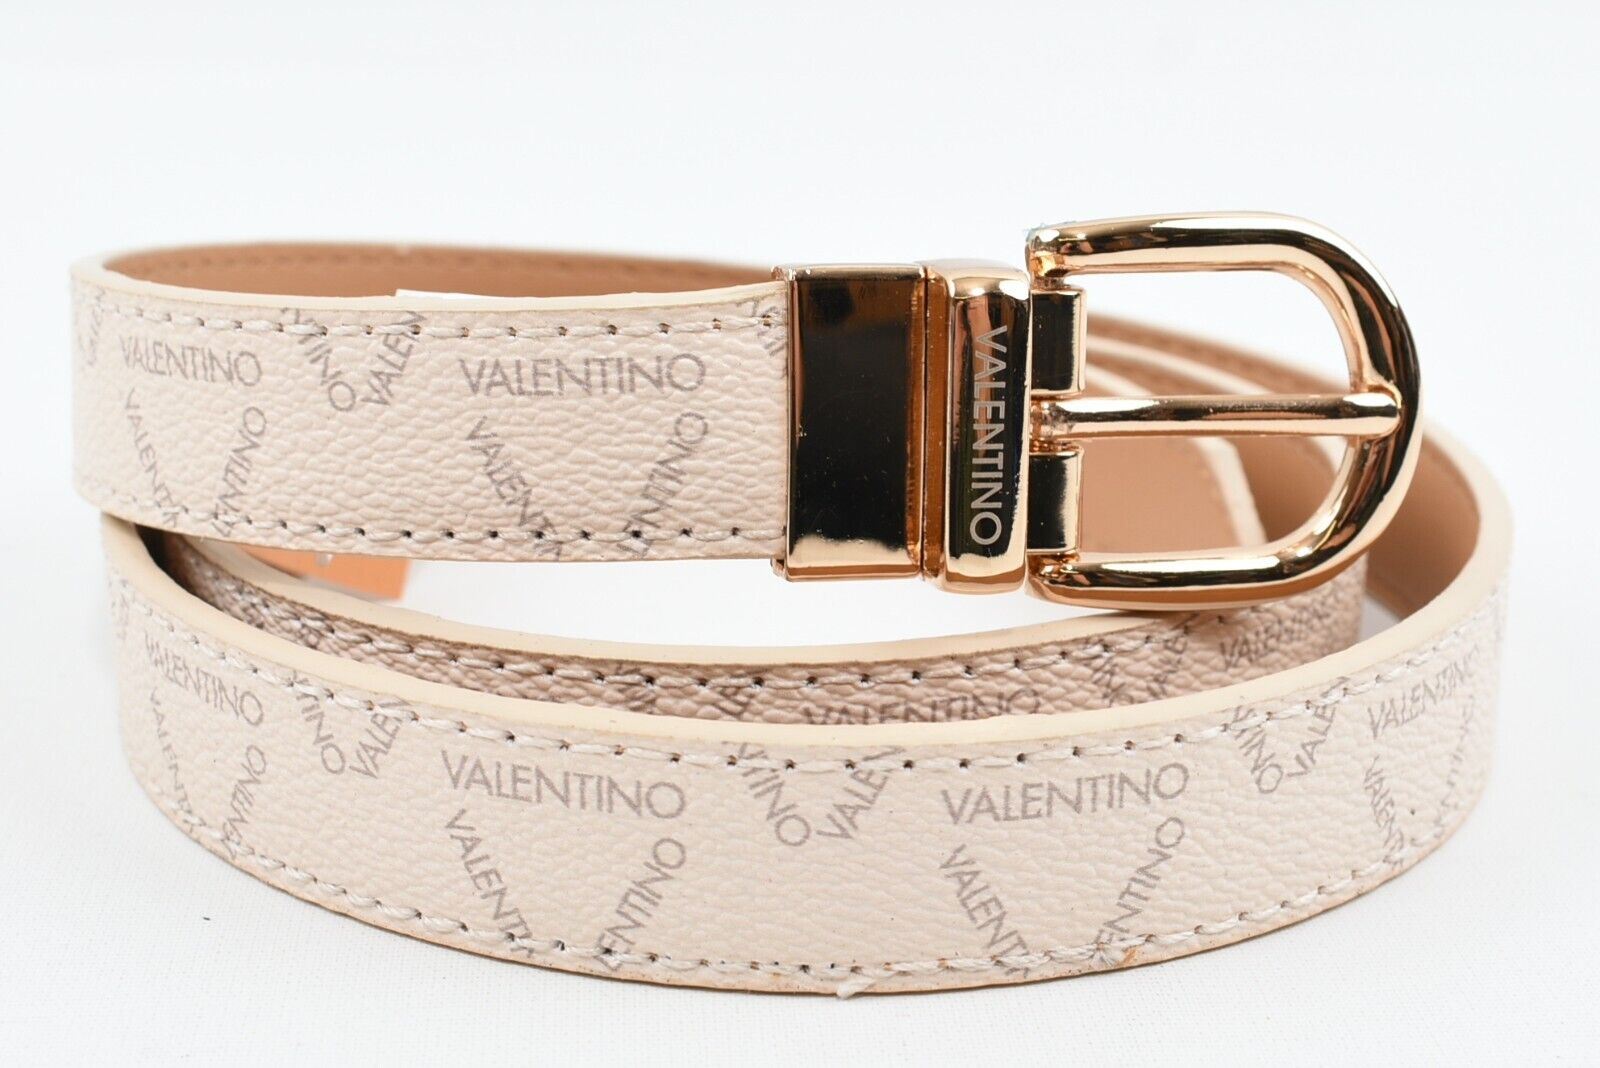 VALENTINO by MARIO VALENTINO Womens Reversible Belt, Nude/Brown, size L to XL